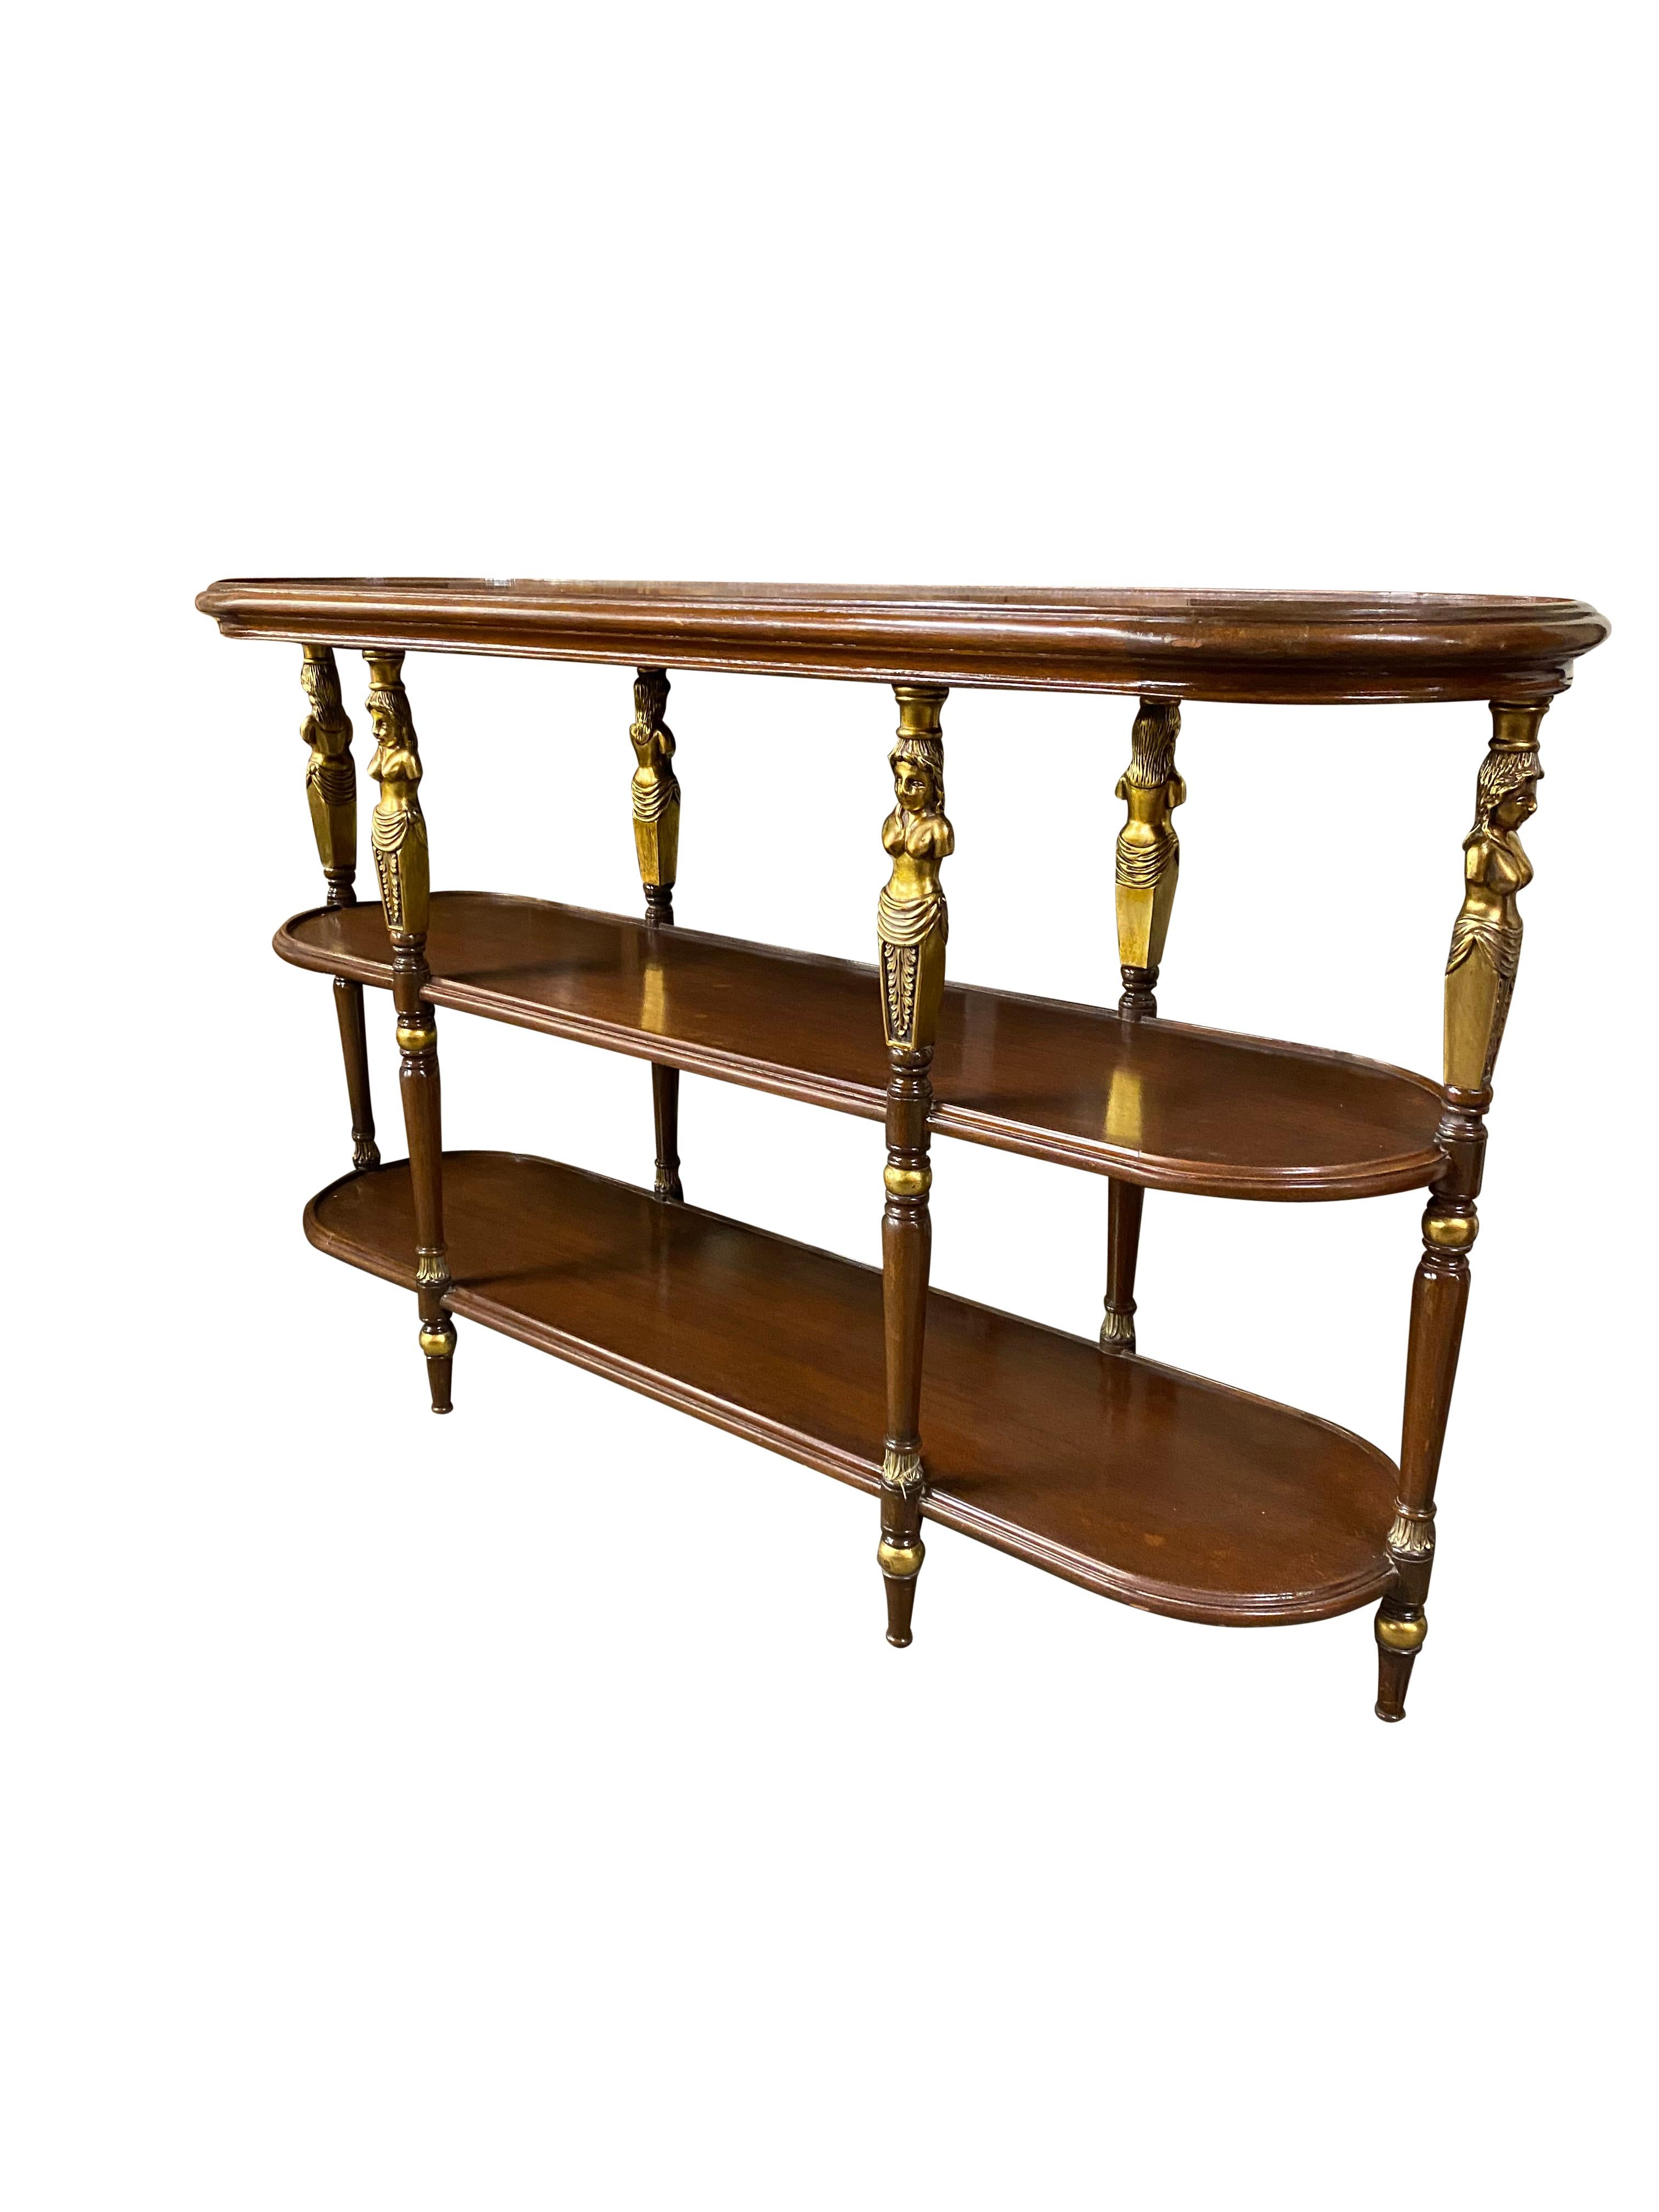 20th Century French Empire Style Open Bookcase/Etagere Tiered Table For Sale 11